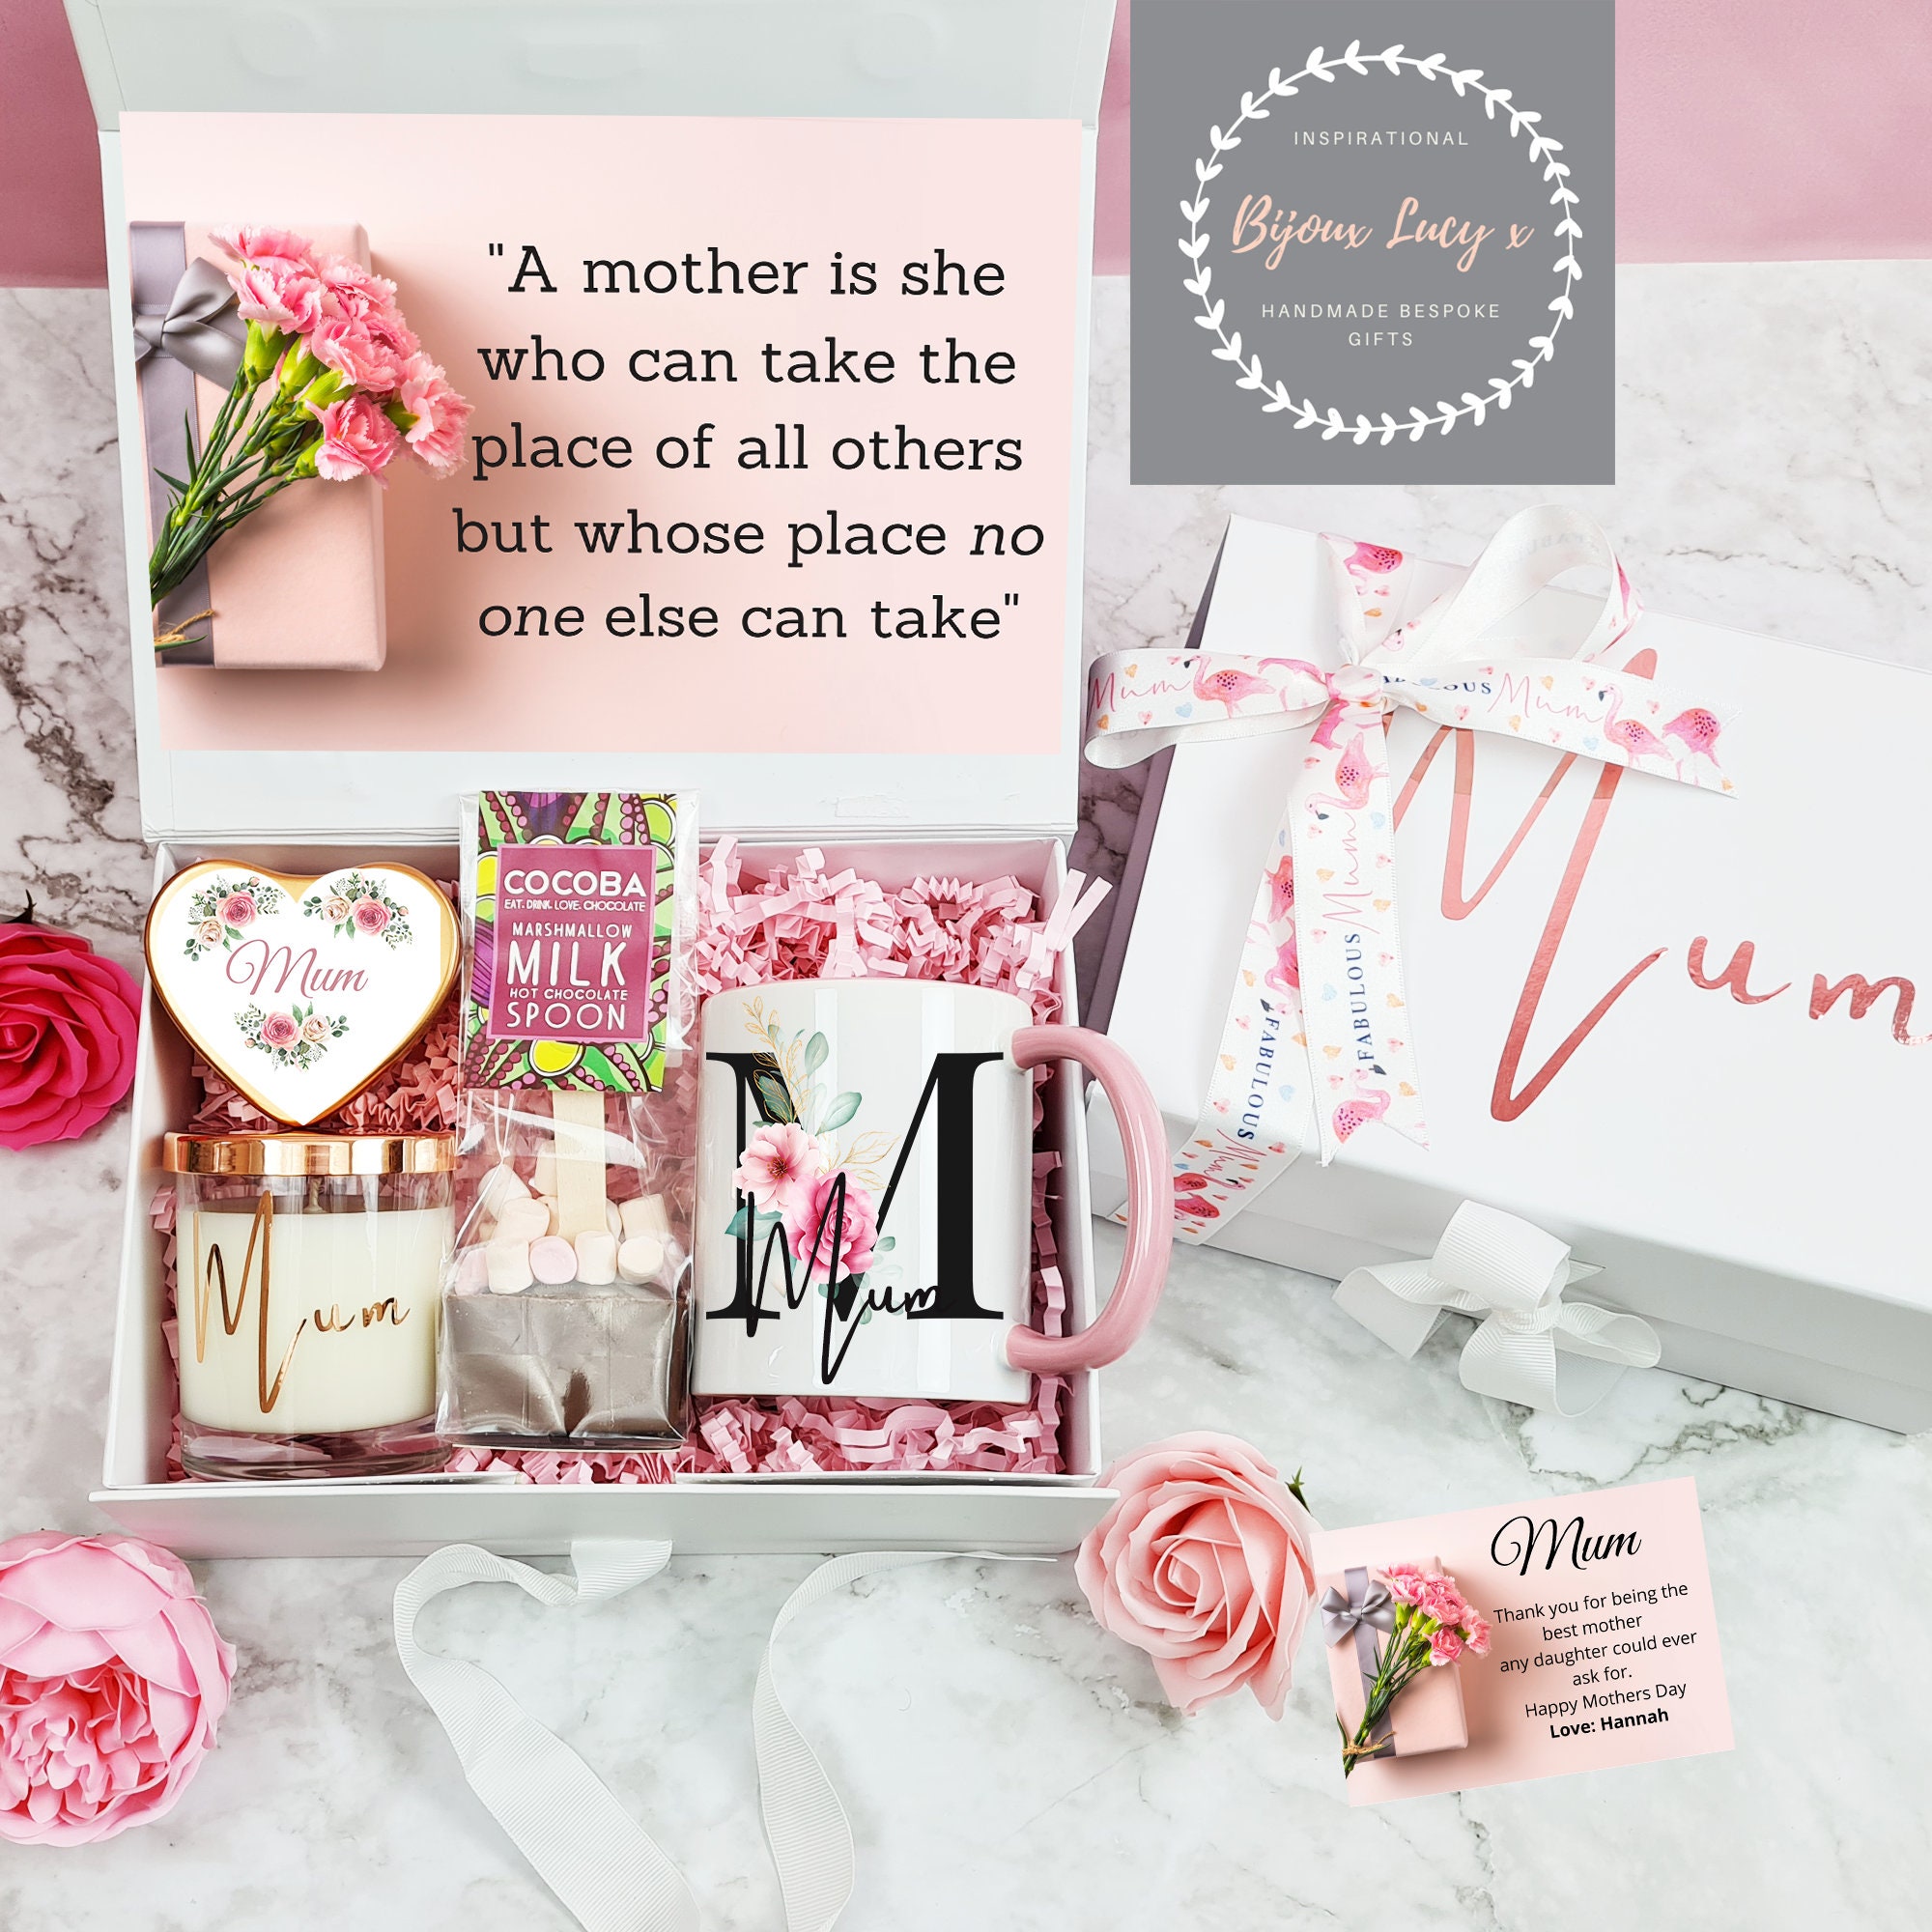 Personalised Christmas Gift Box for Mum, Personalised Gift